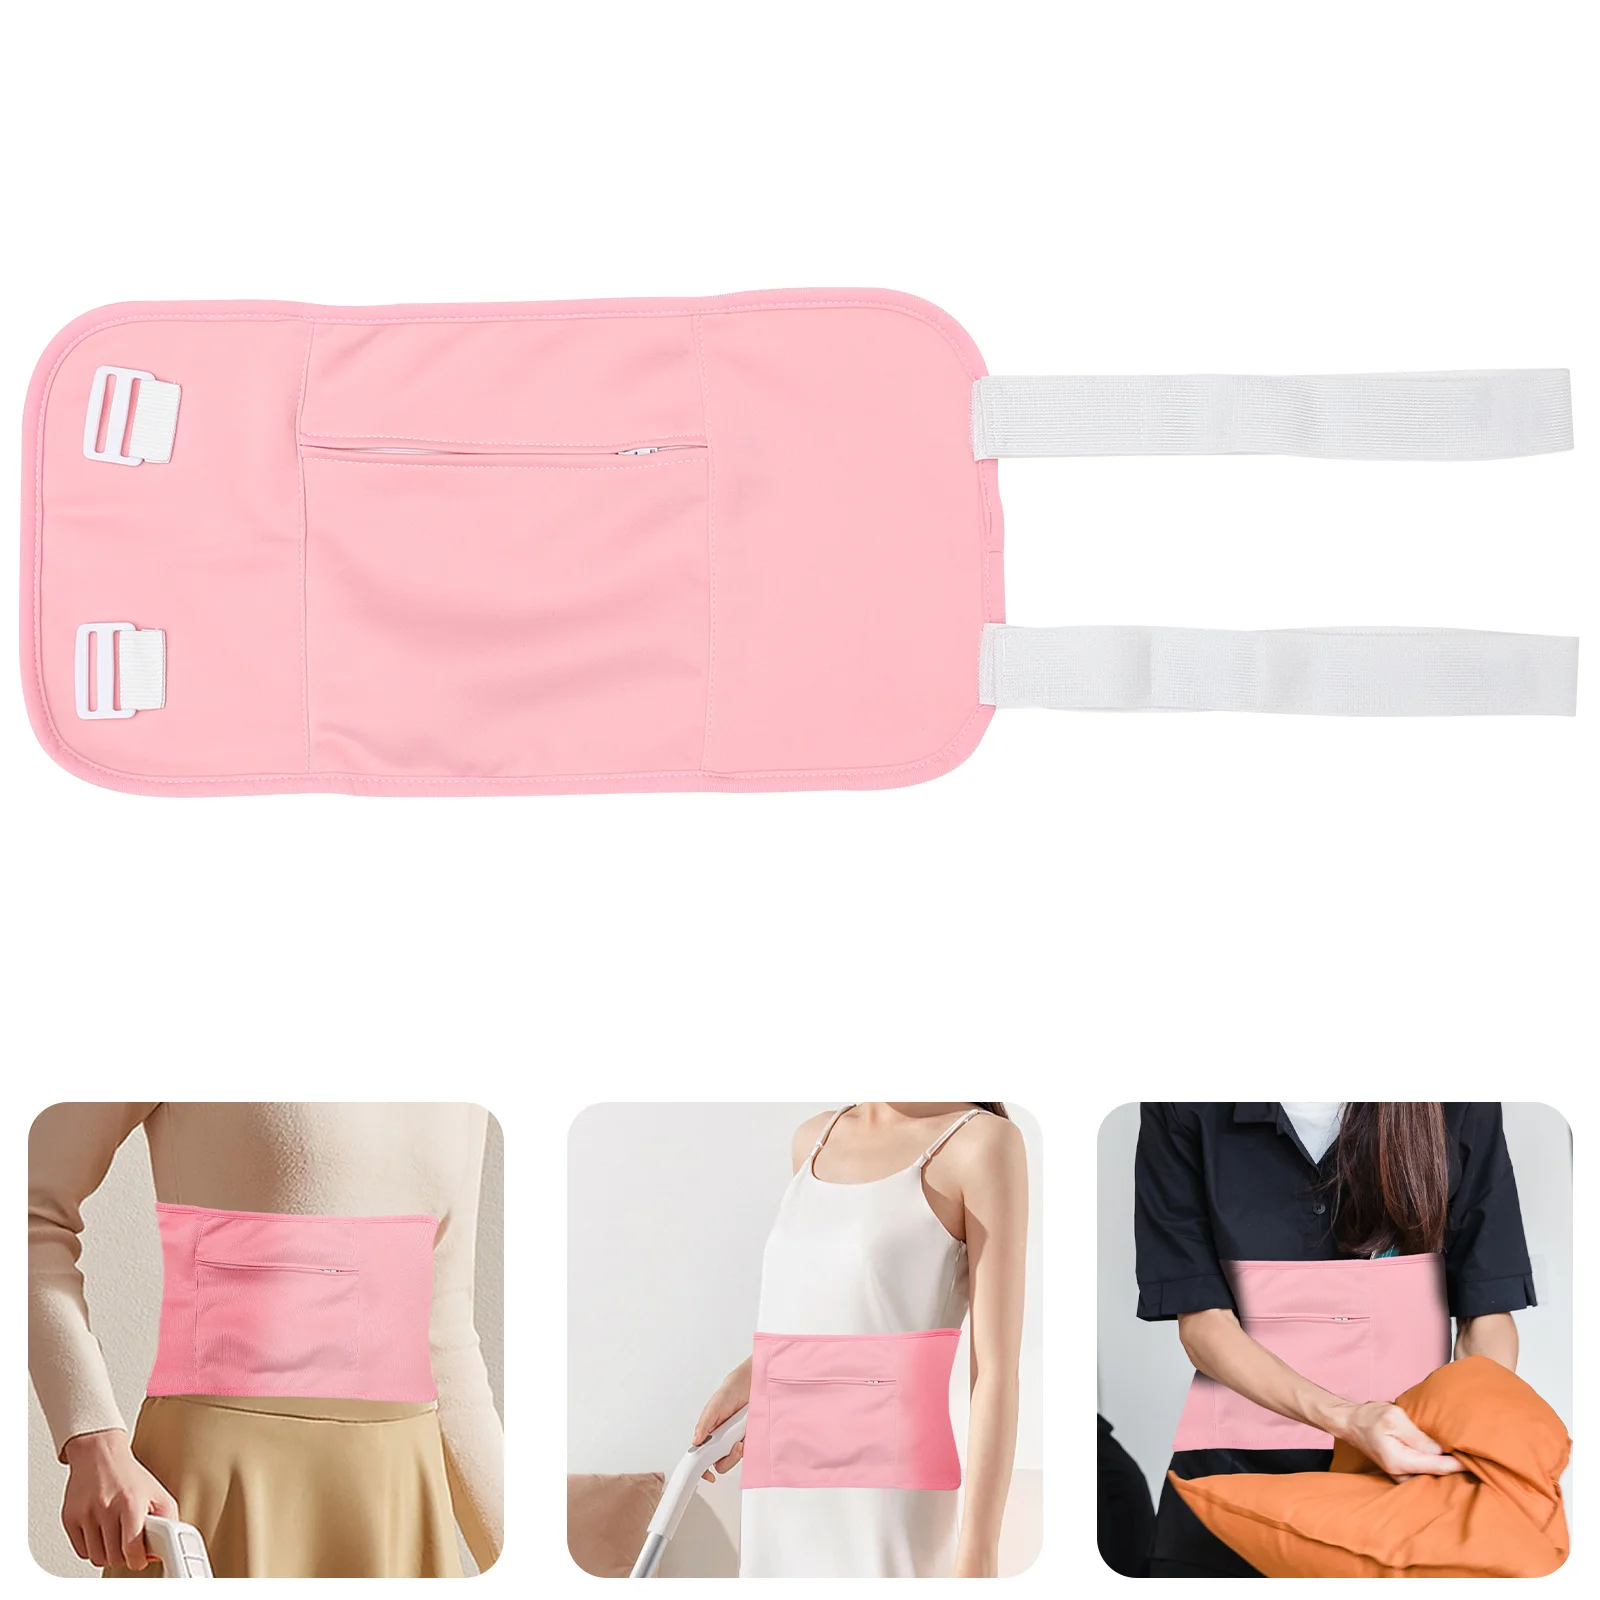 

Portable Sleep Help Fitness Relax Assist Convenient Castor Oil Belt Comfortable Reusable Useful Pink Wrapping Paper